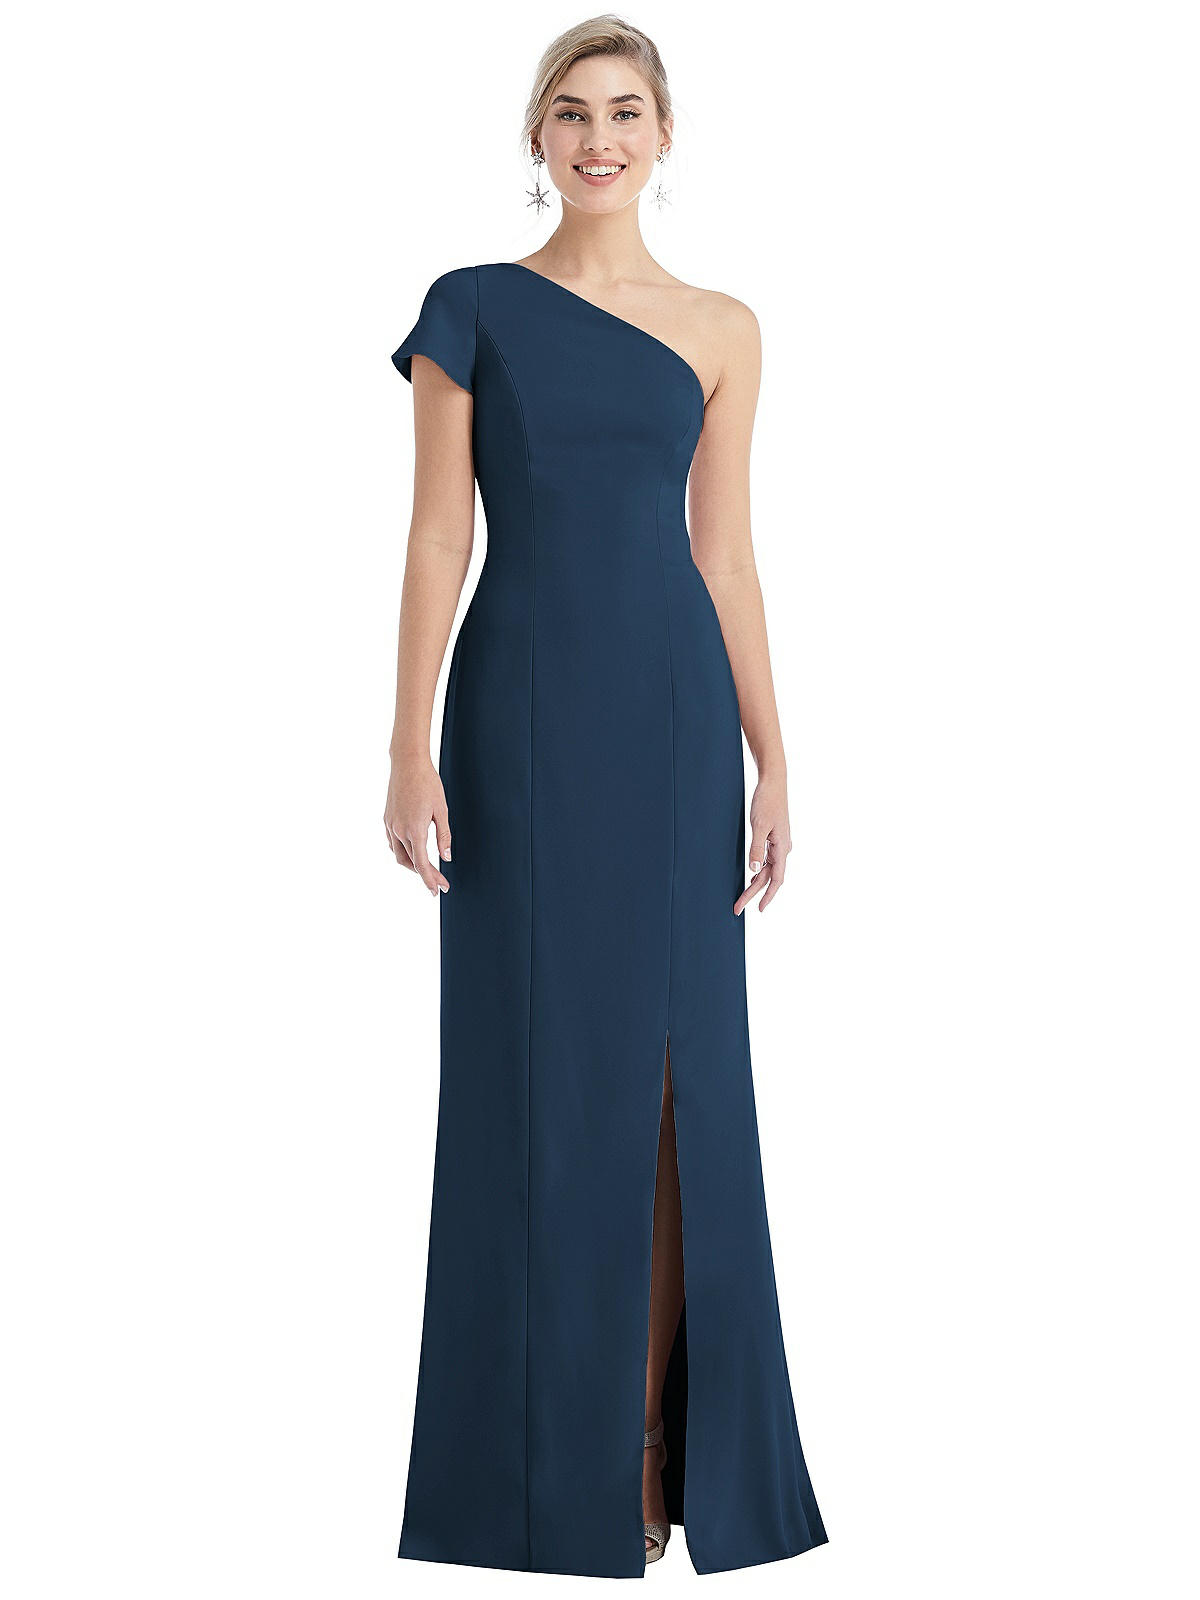 Off-the-shoulder Ruffle Neck Satin Trumpet Bridesmaid Dress In